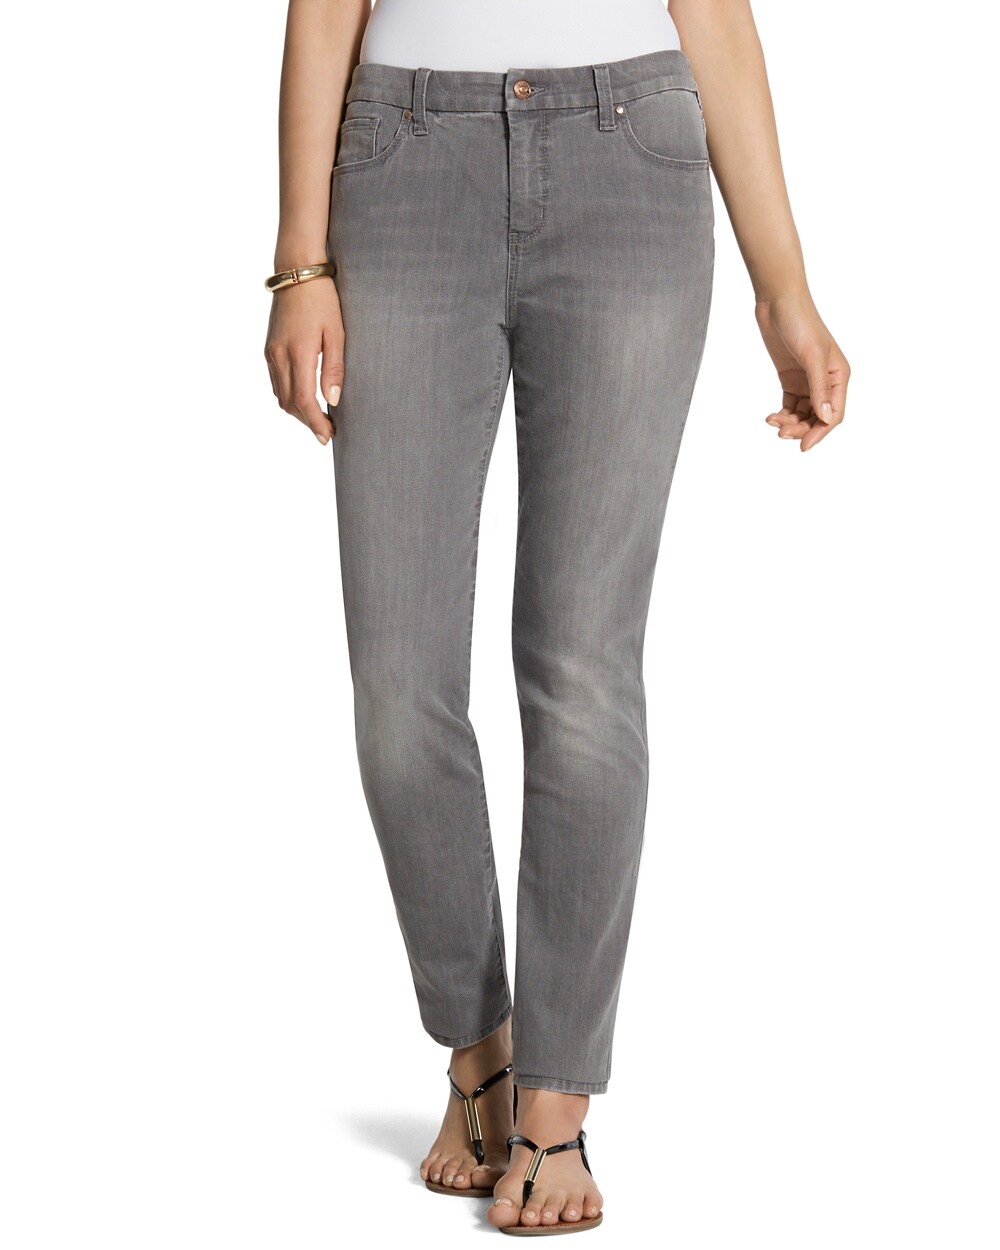 Girlfriend Ankle Jeans in Gray - Chico's